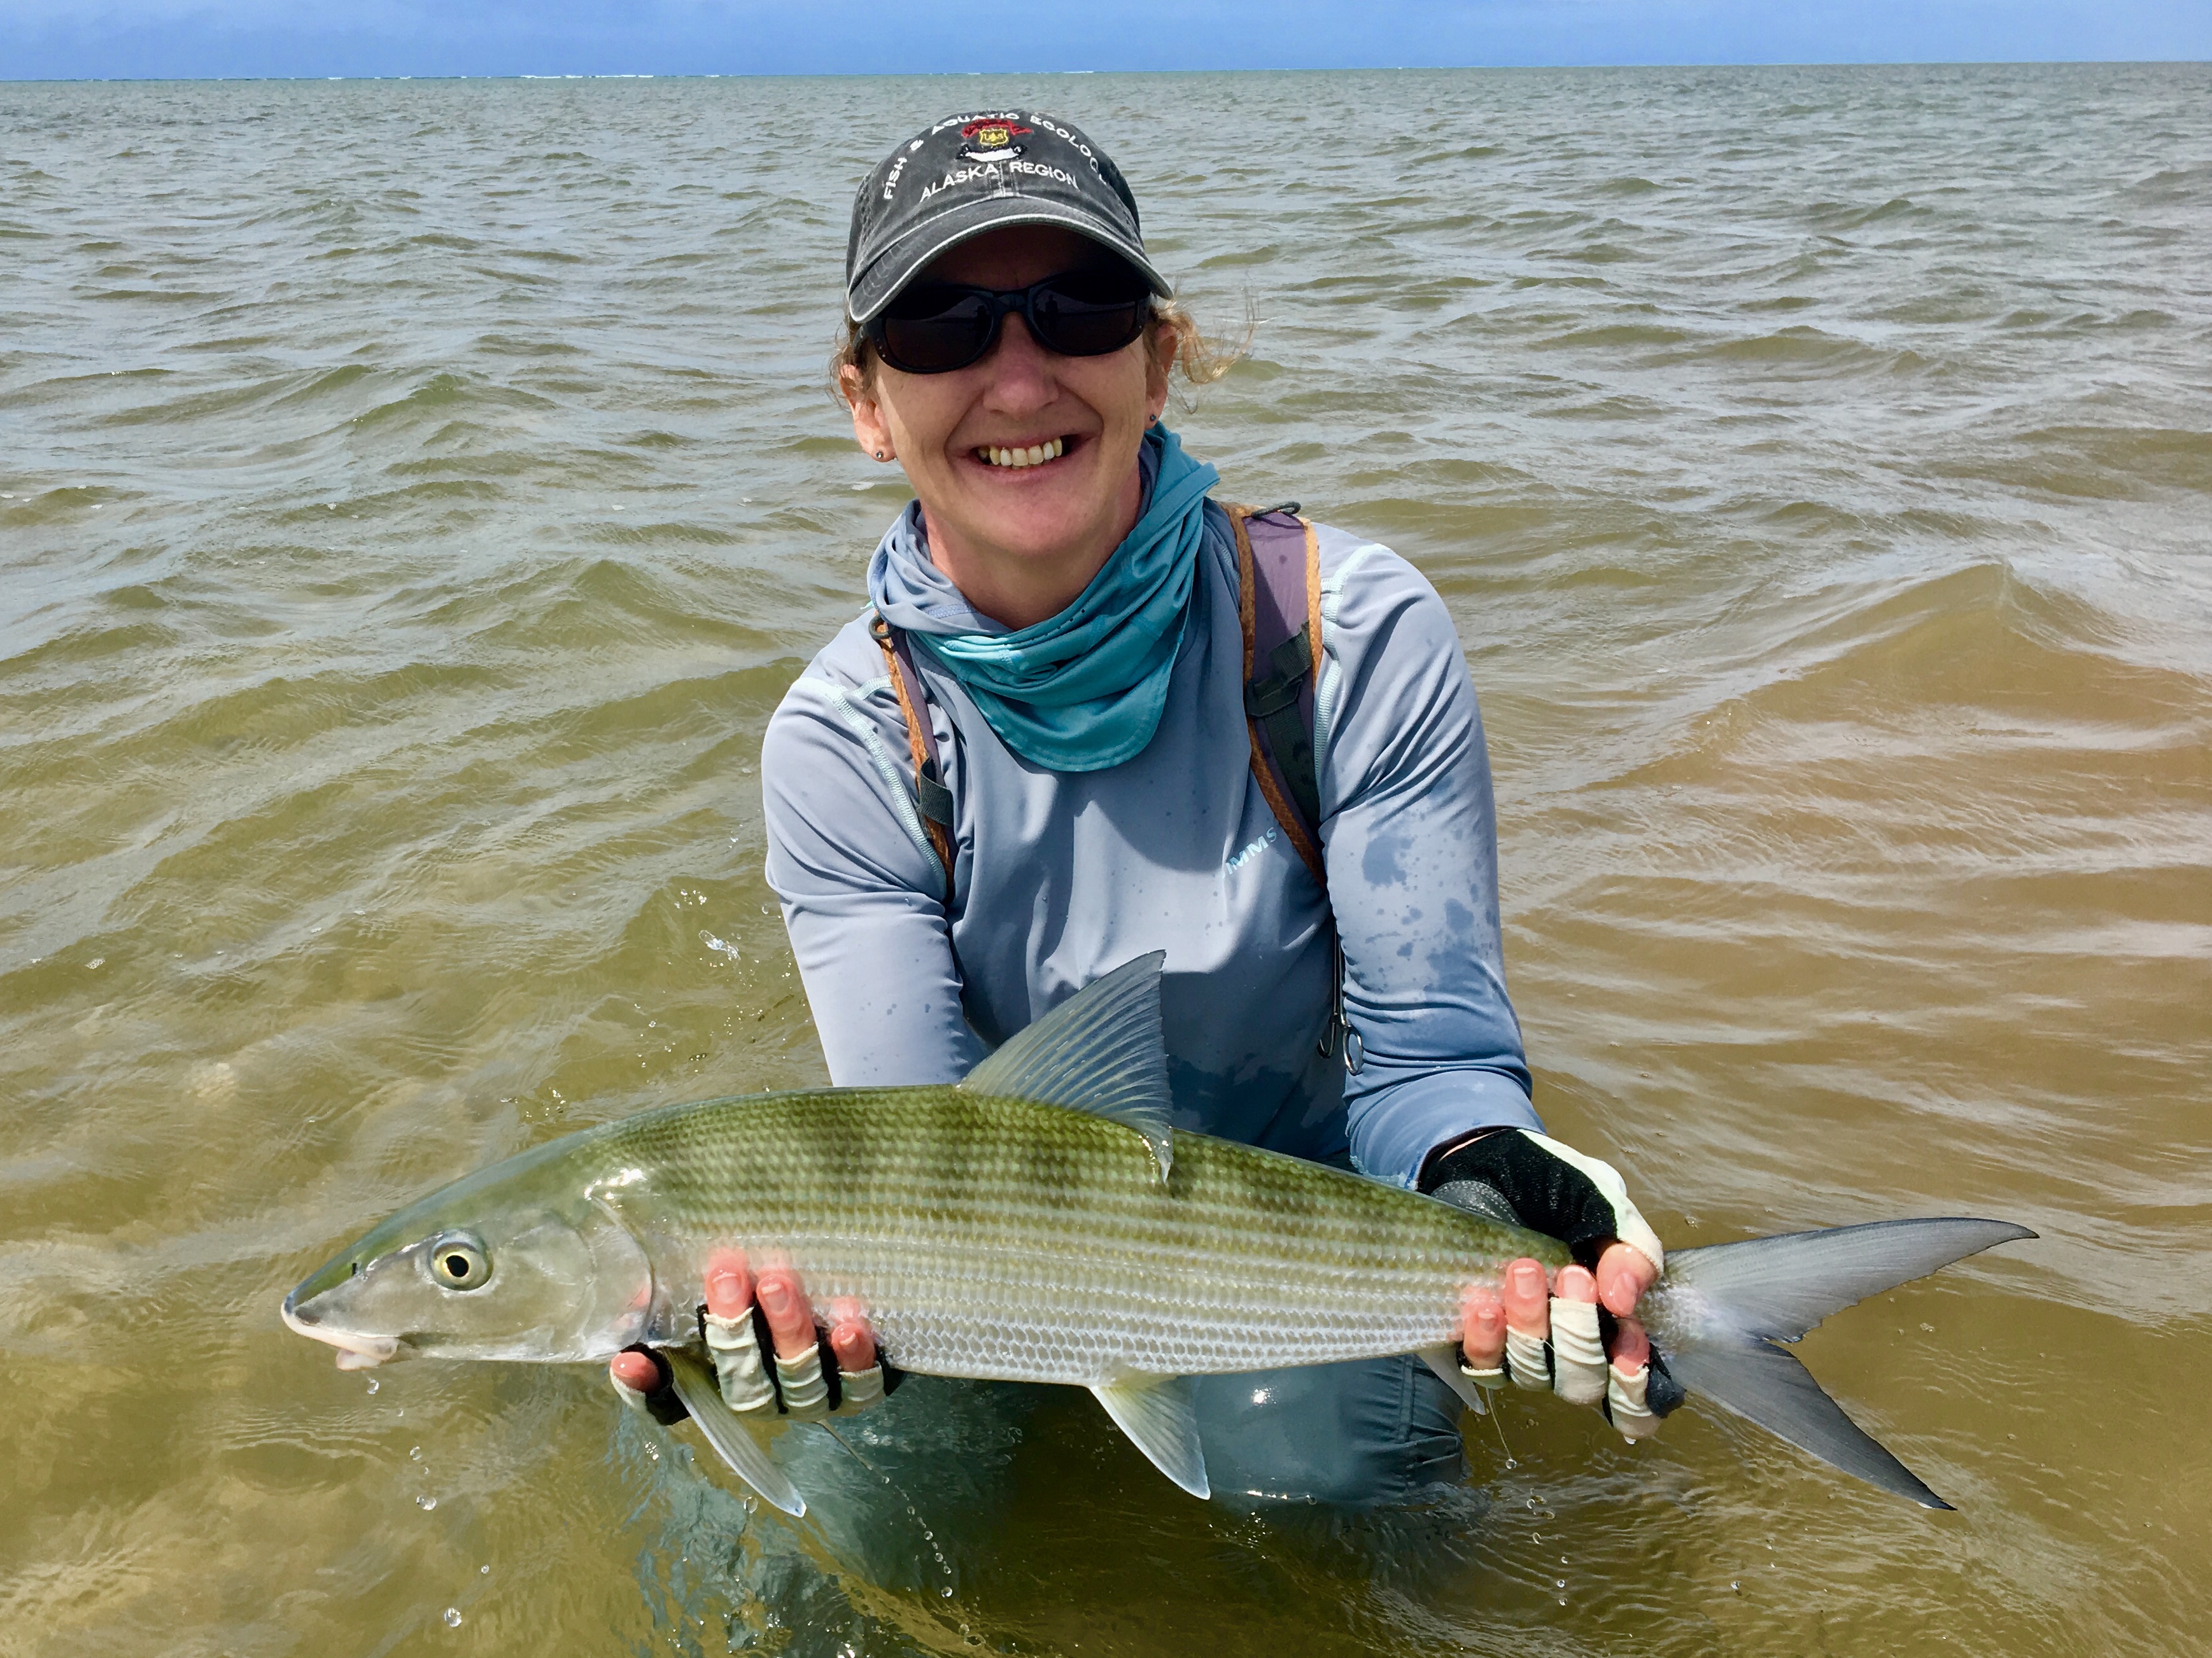 Tom and Melissa Cady had a memorable day flyfishing the Molokai ...